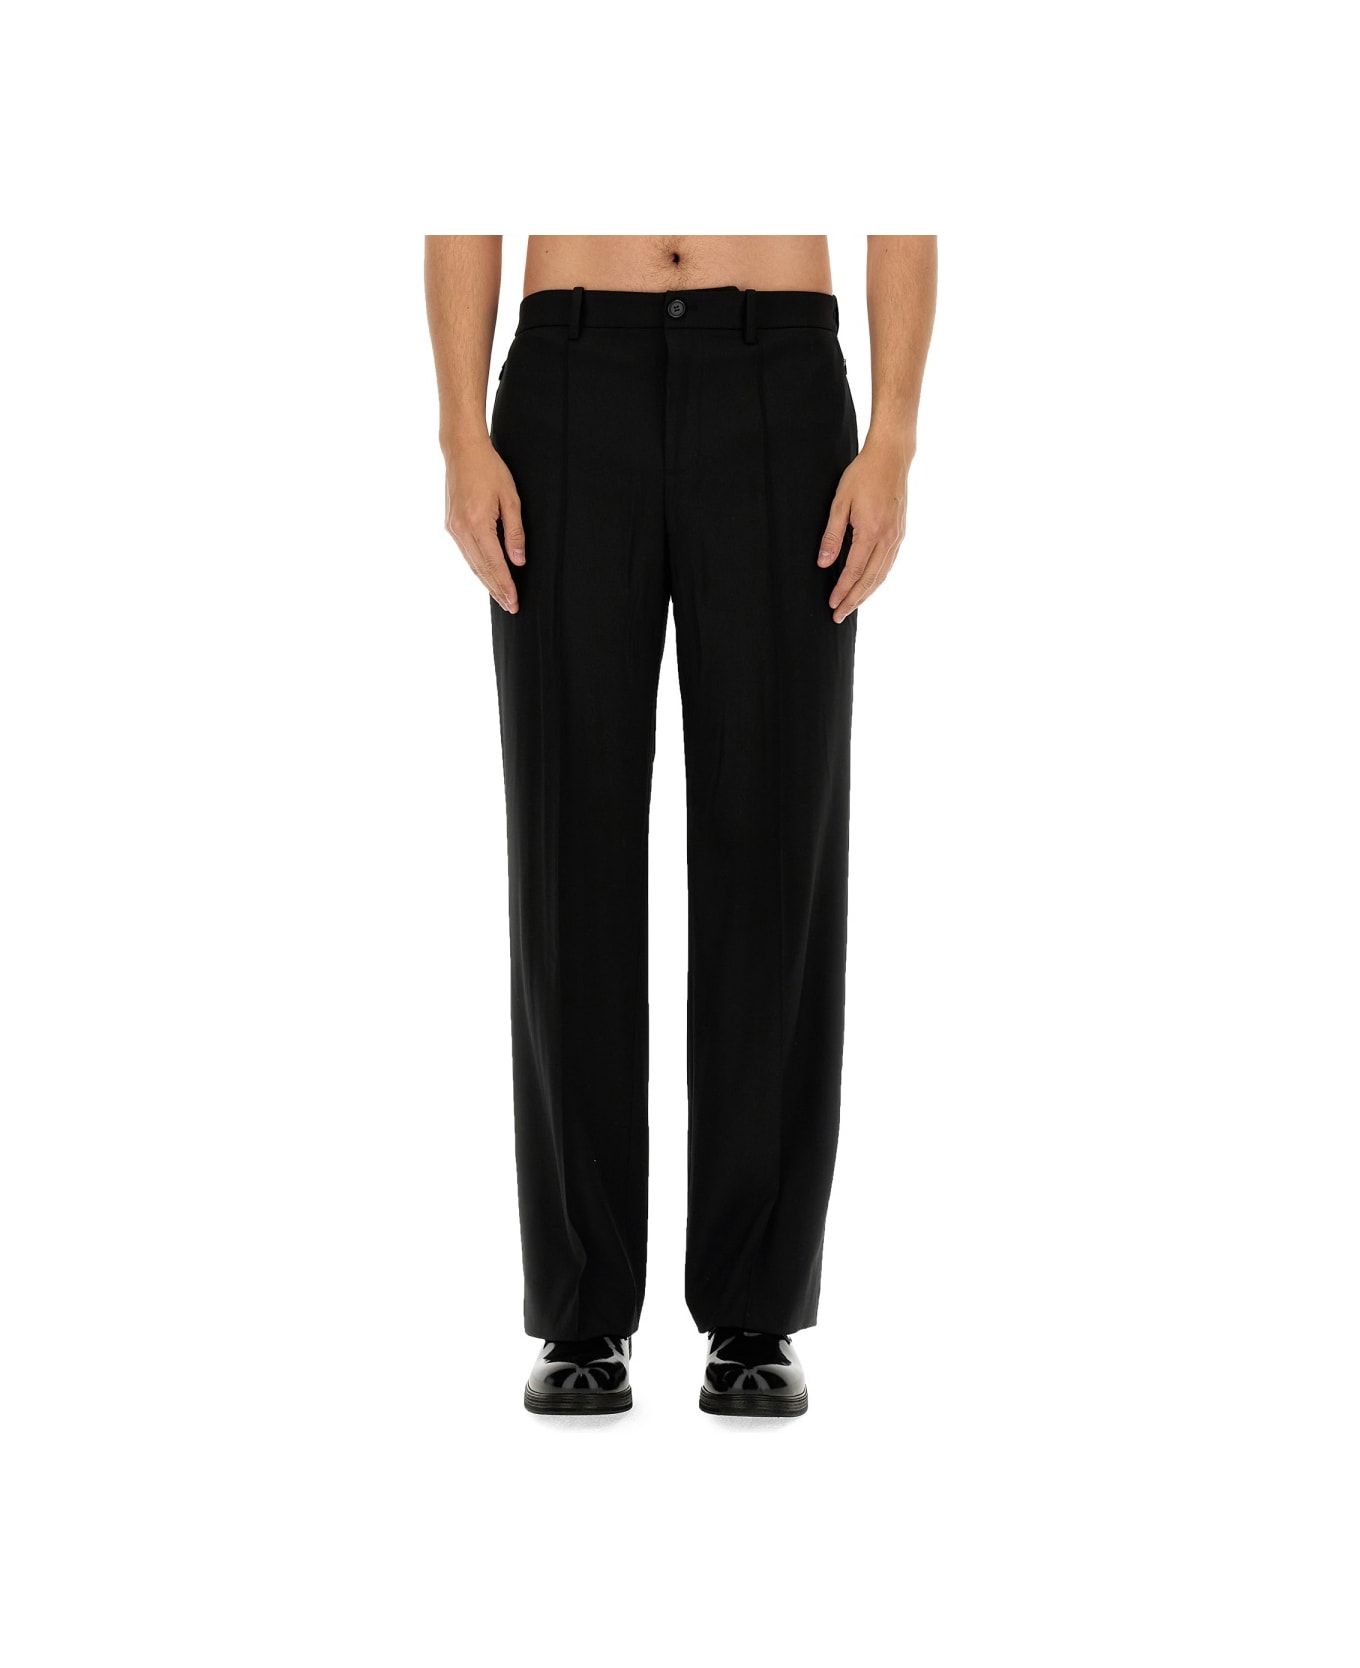 Helmut Lang Relaxed Fit Pants - BLACK